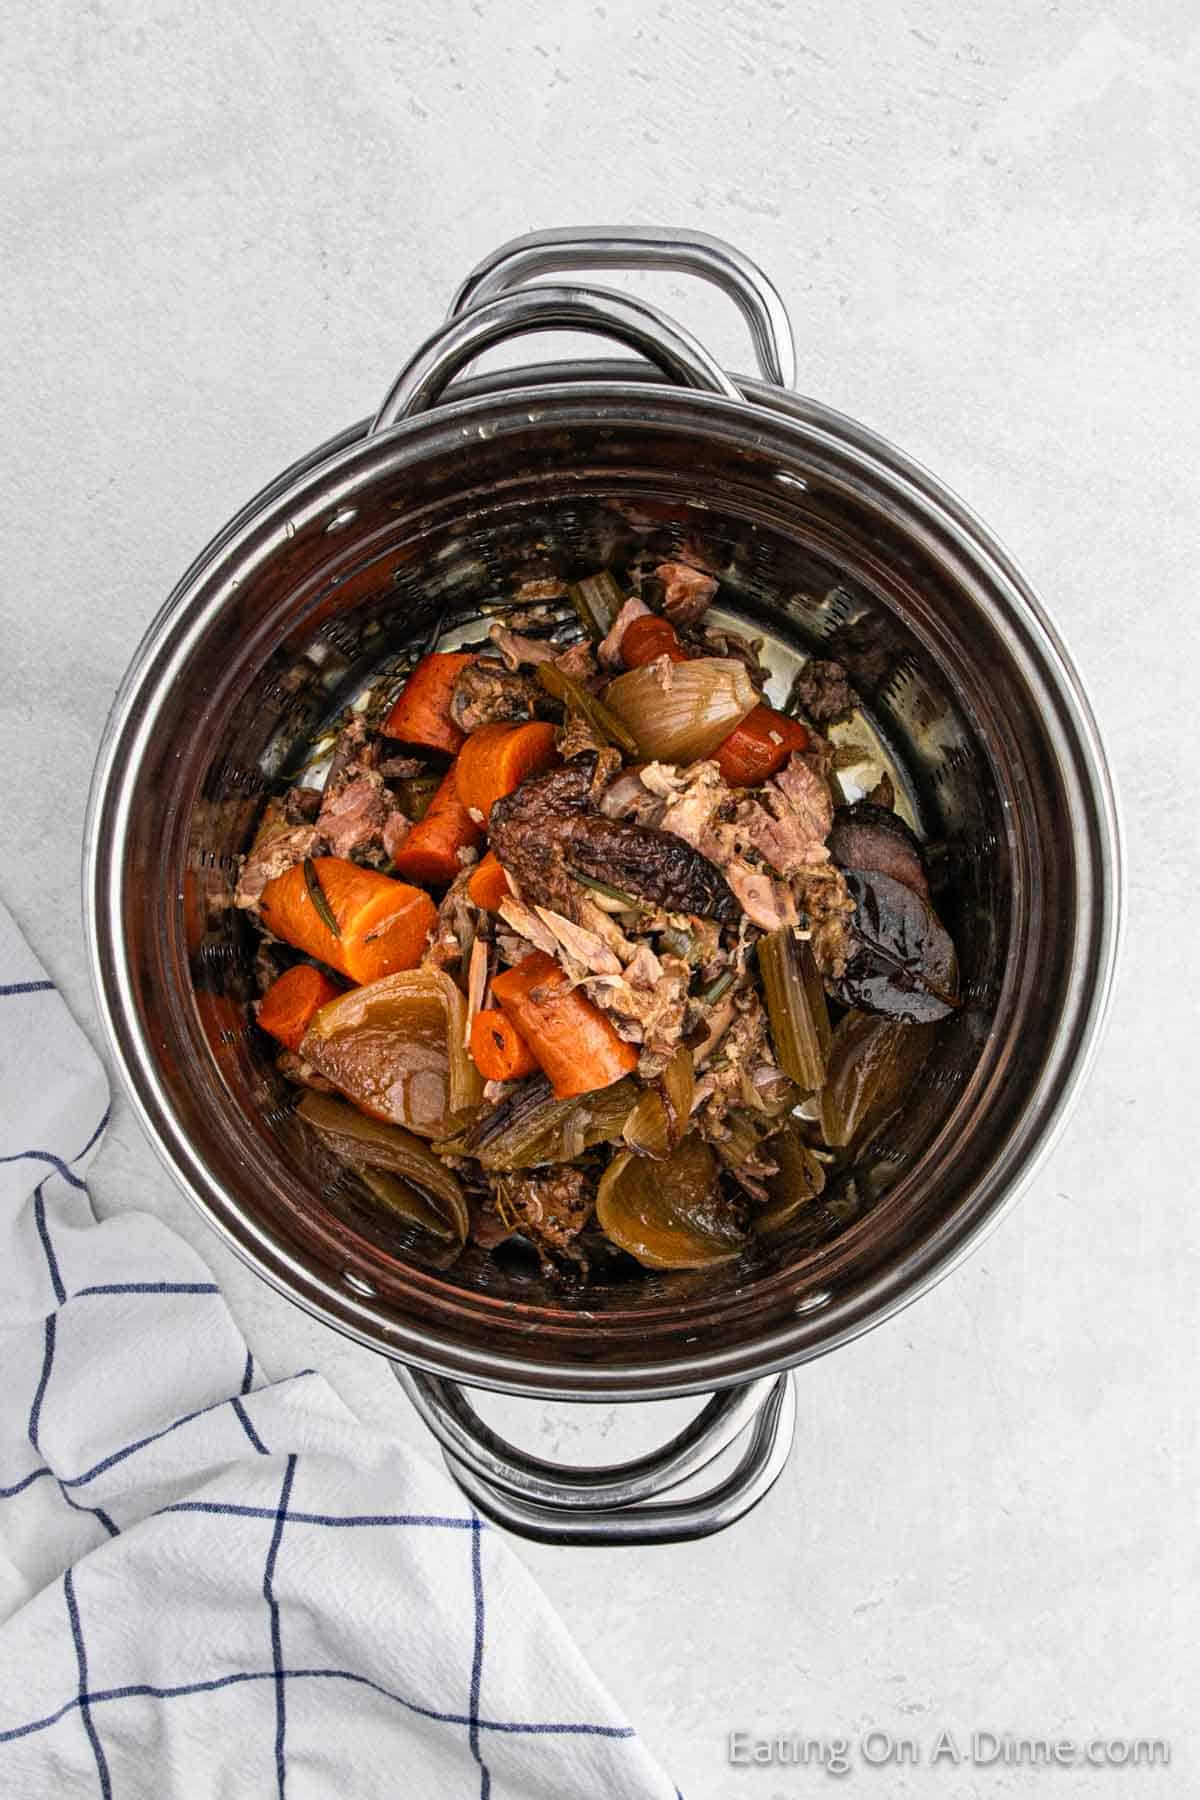 Cooked chicken and vegetables in a large pot